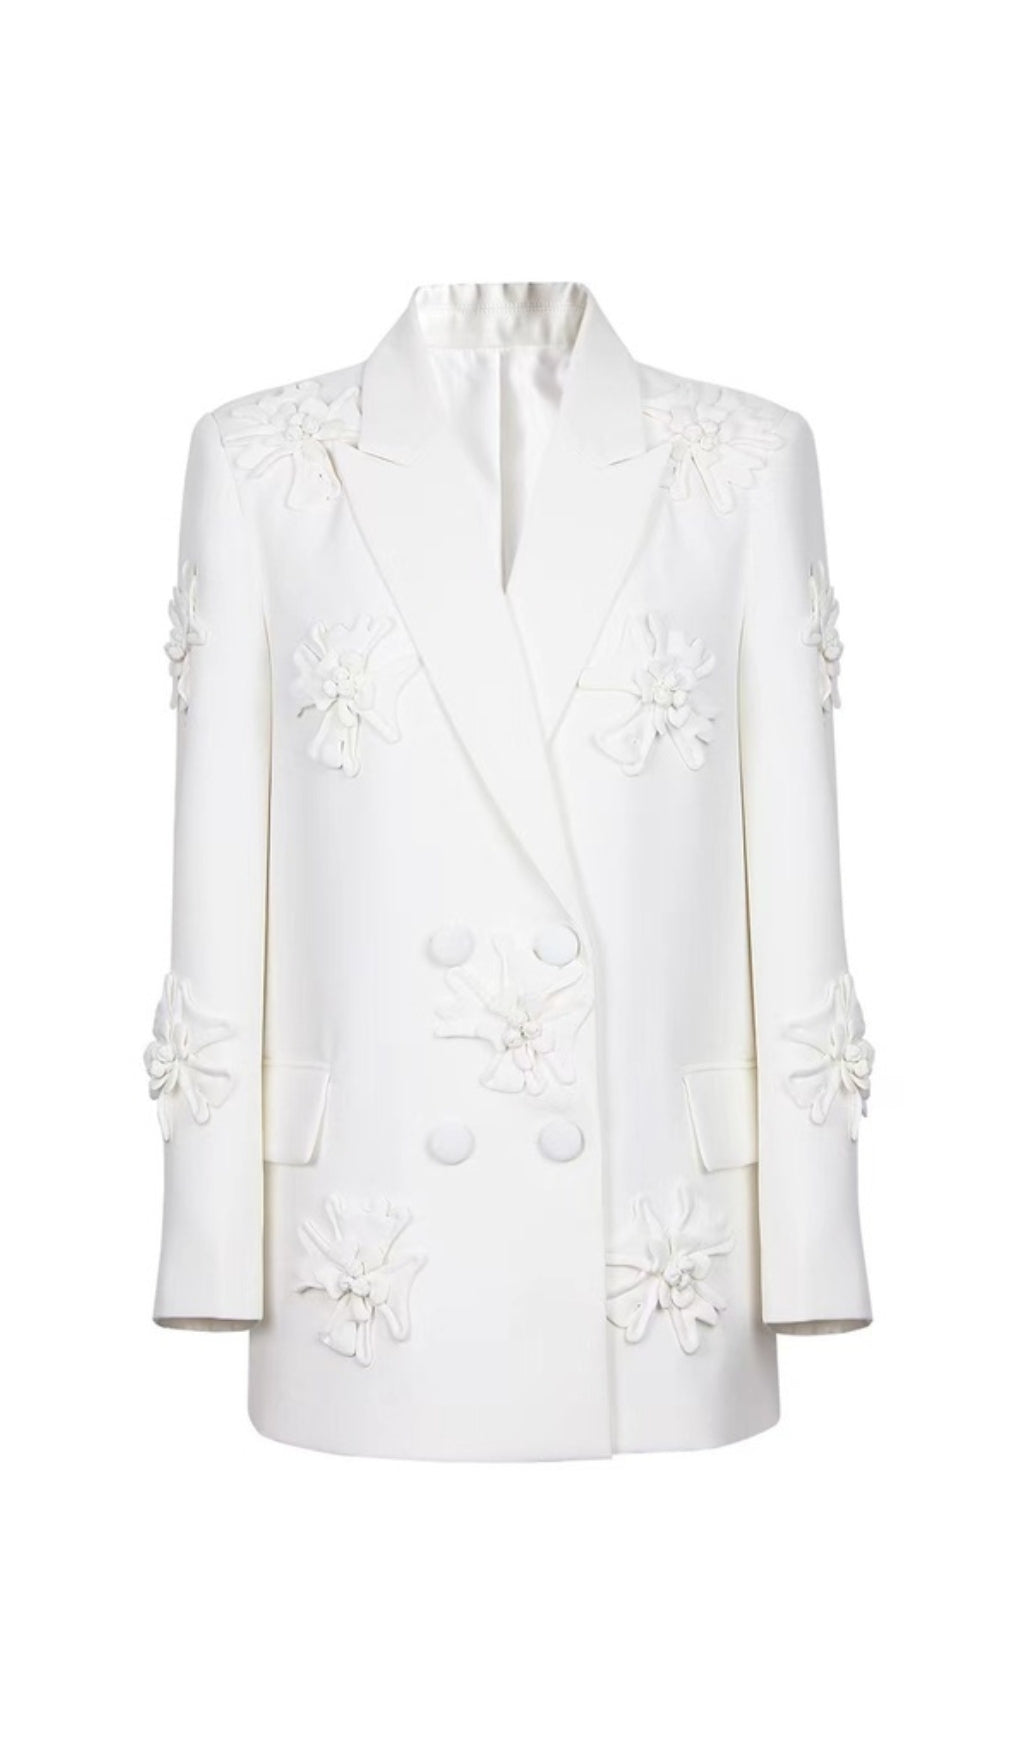 Double-Breasted Three DIMENSIONAL Floral Suit Jacket In White